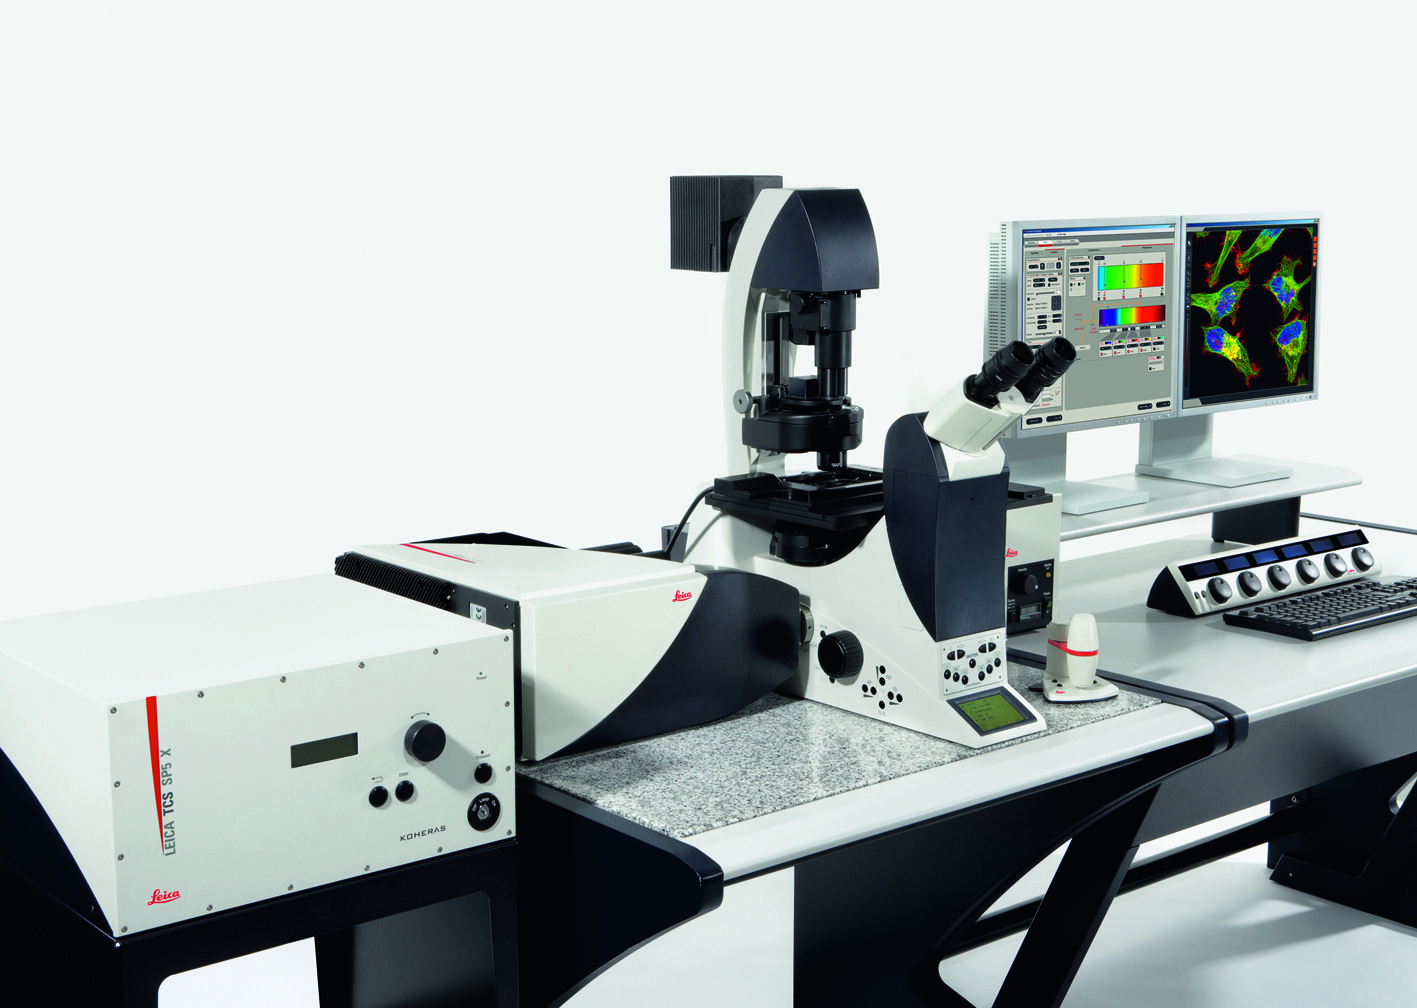 The Leica TCS SP5 X ‘white light laser’ confocal can excite the dyes of today and tomorrow with ideal spectral detection. 